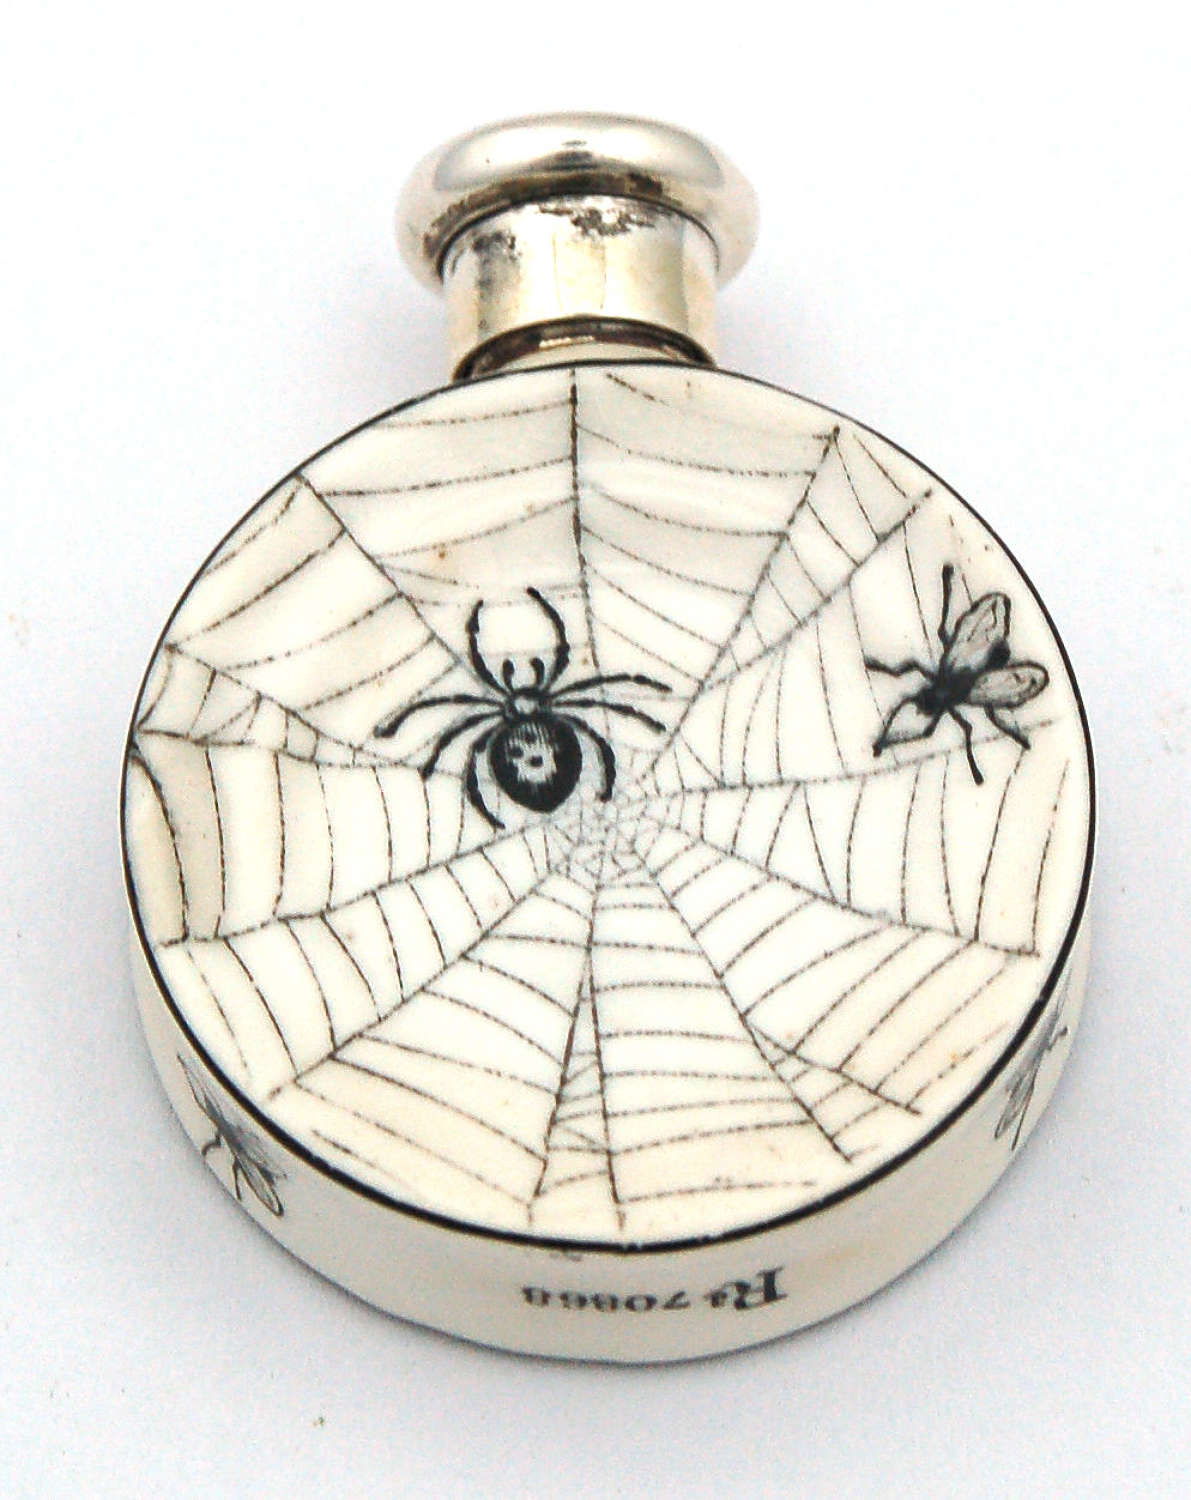 Spider webb plate scent by S Mordan 1883